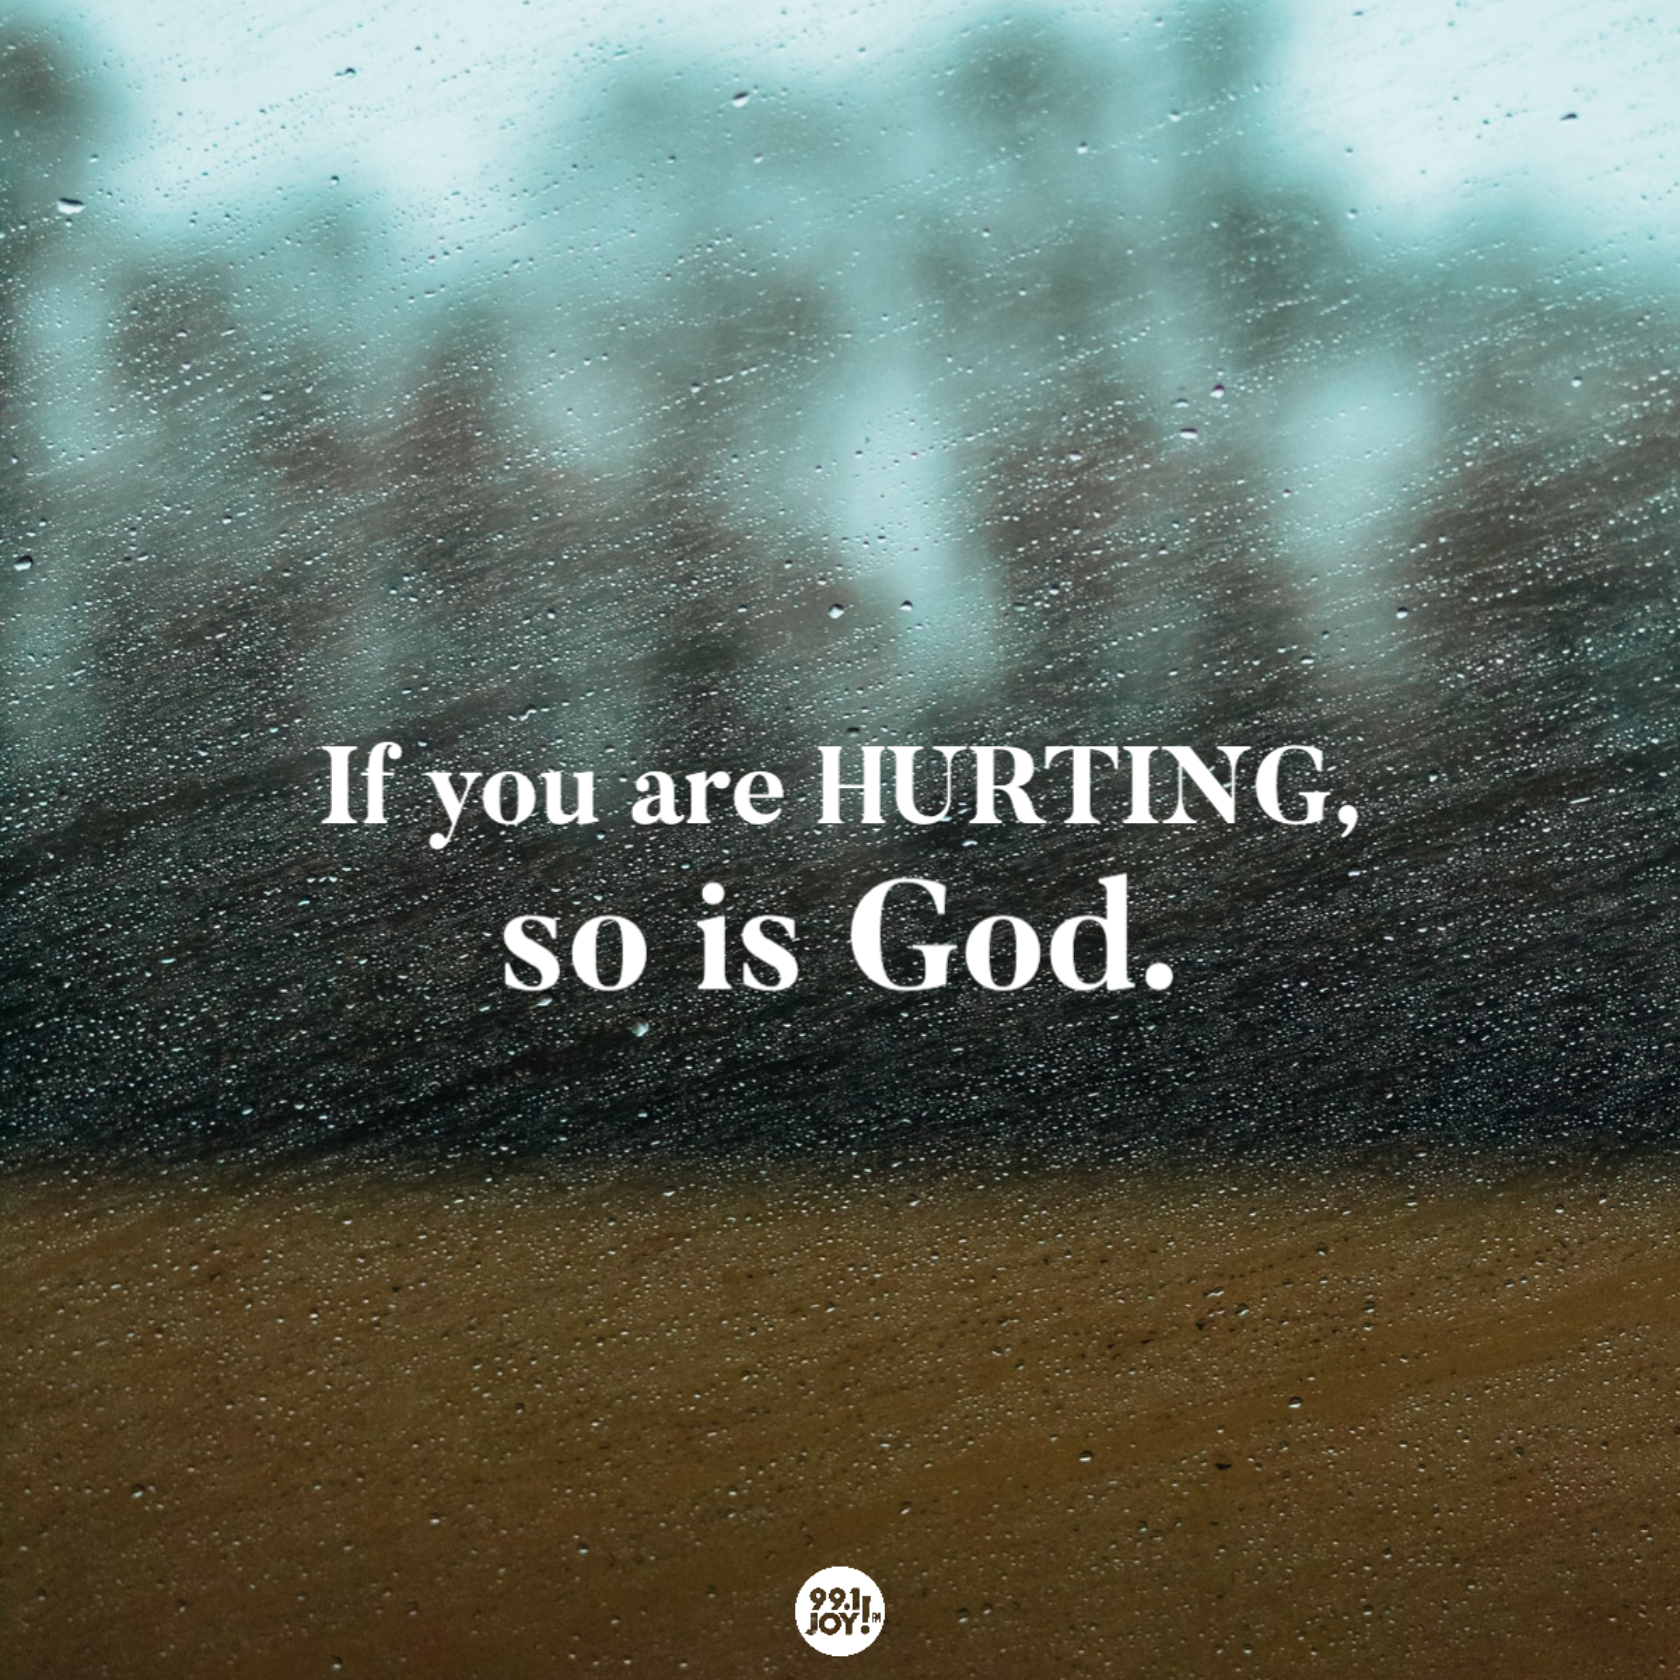 If you are hurting, so is God